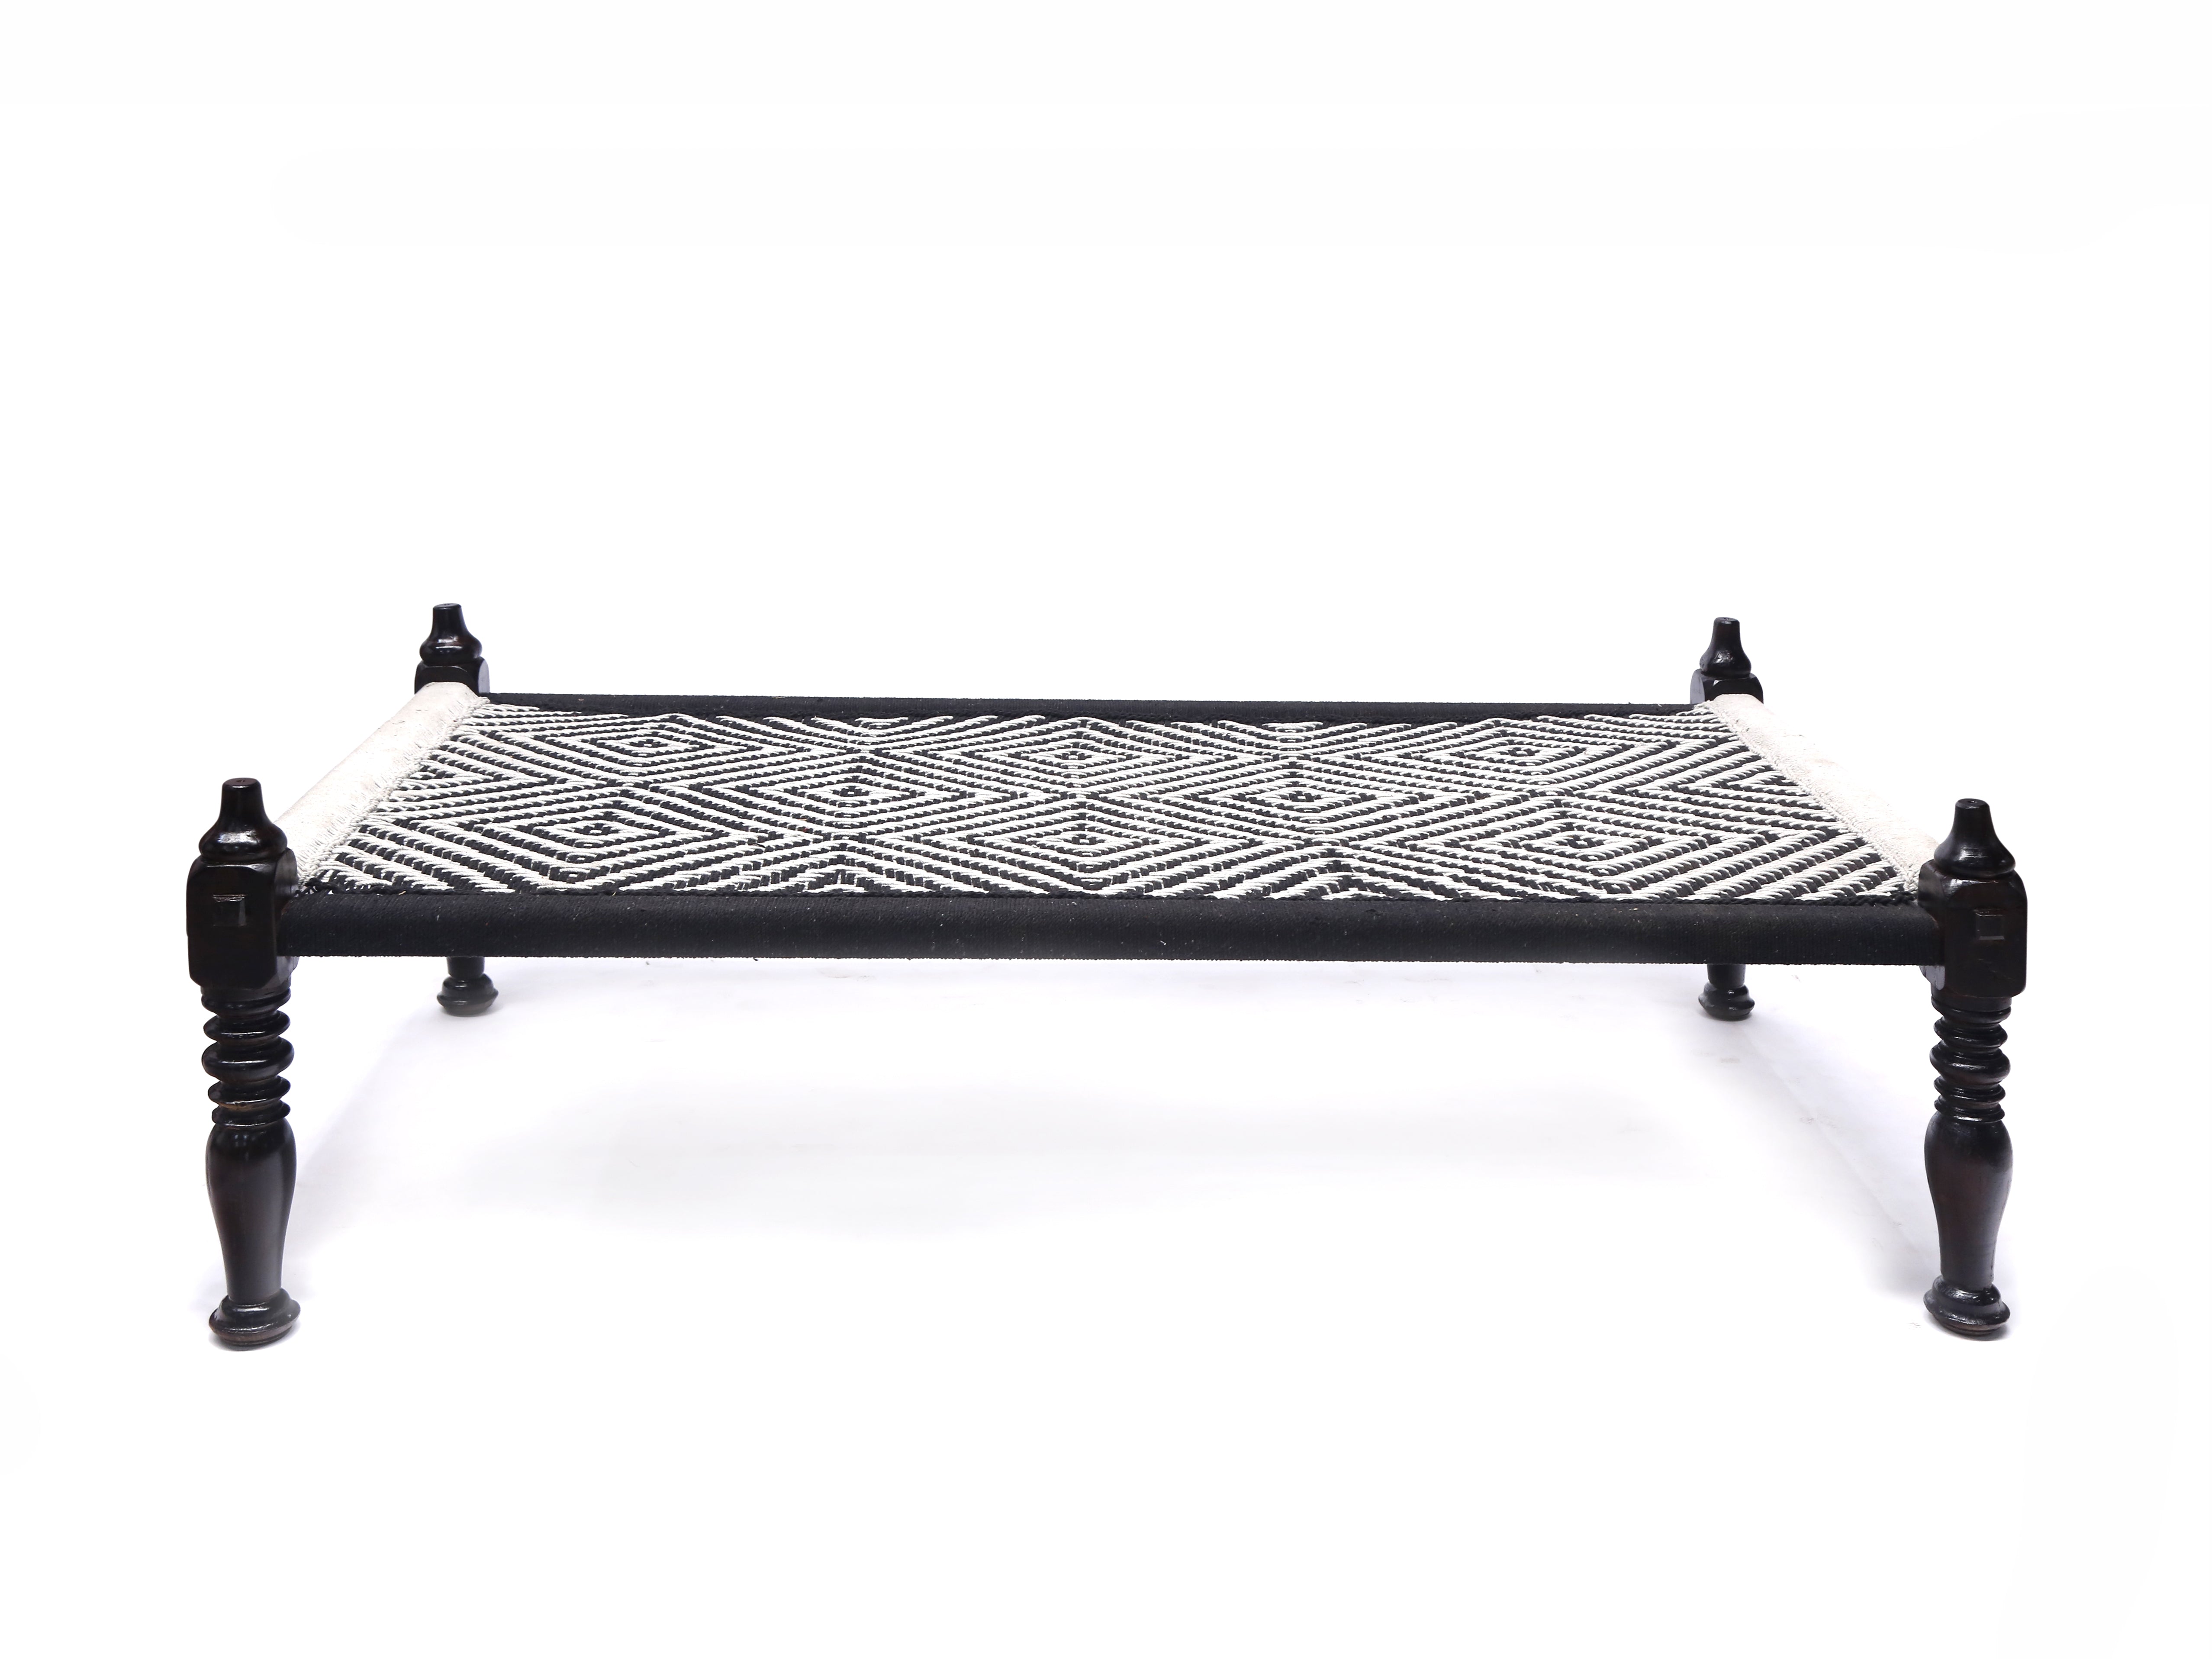 Indian Woven Charpai Bed